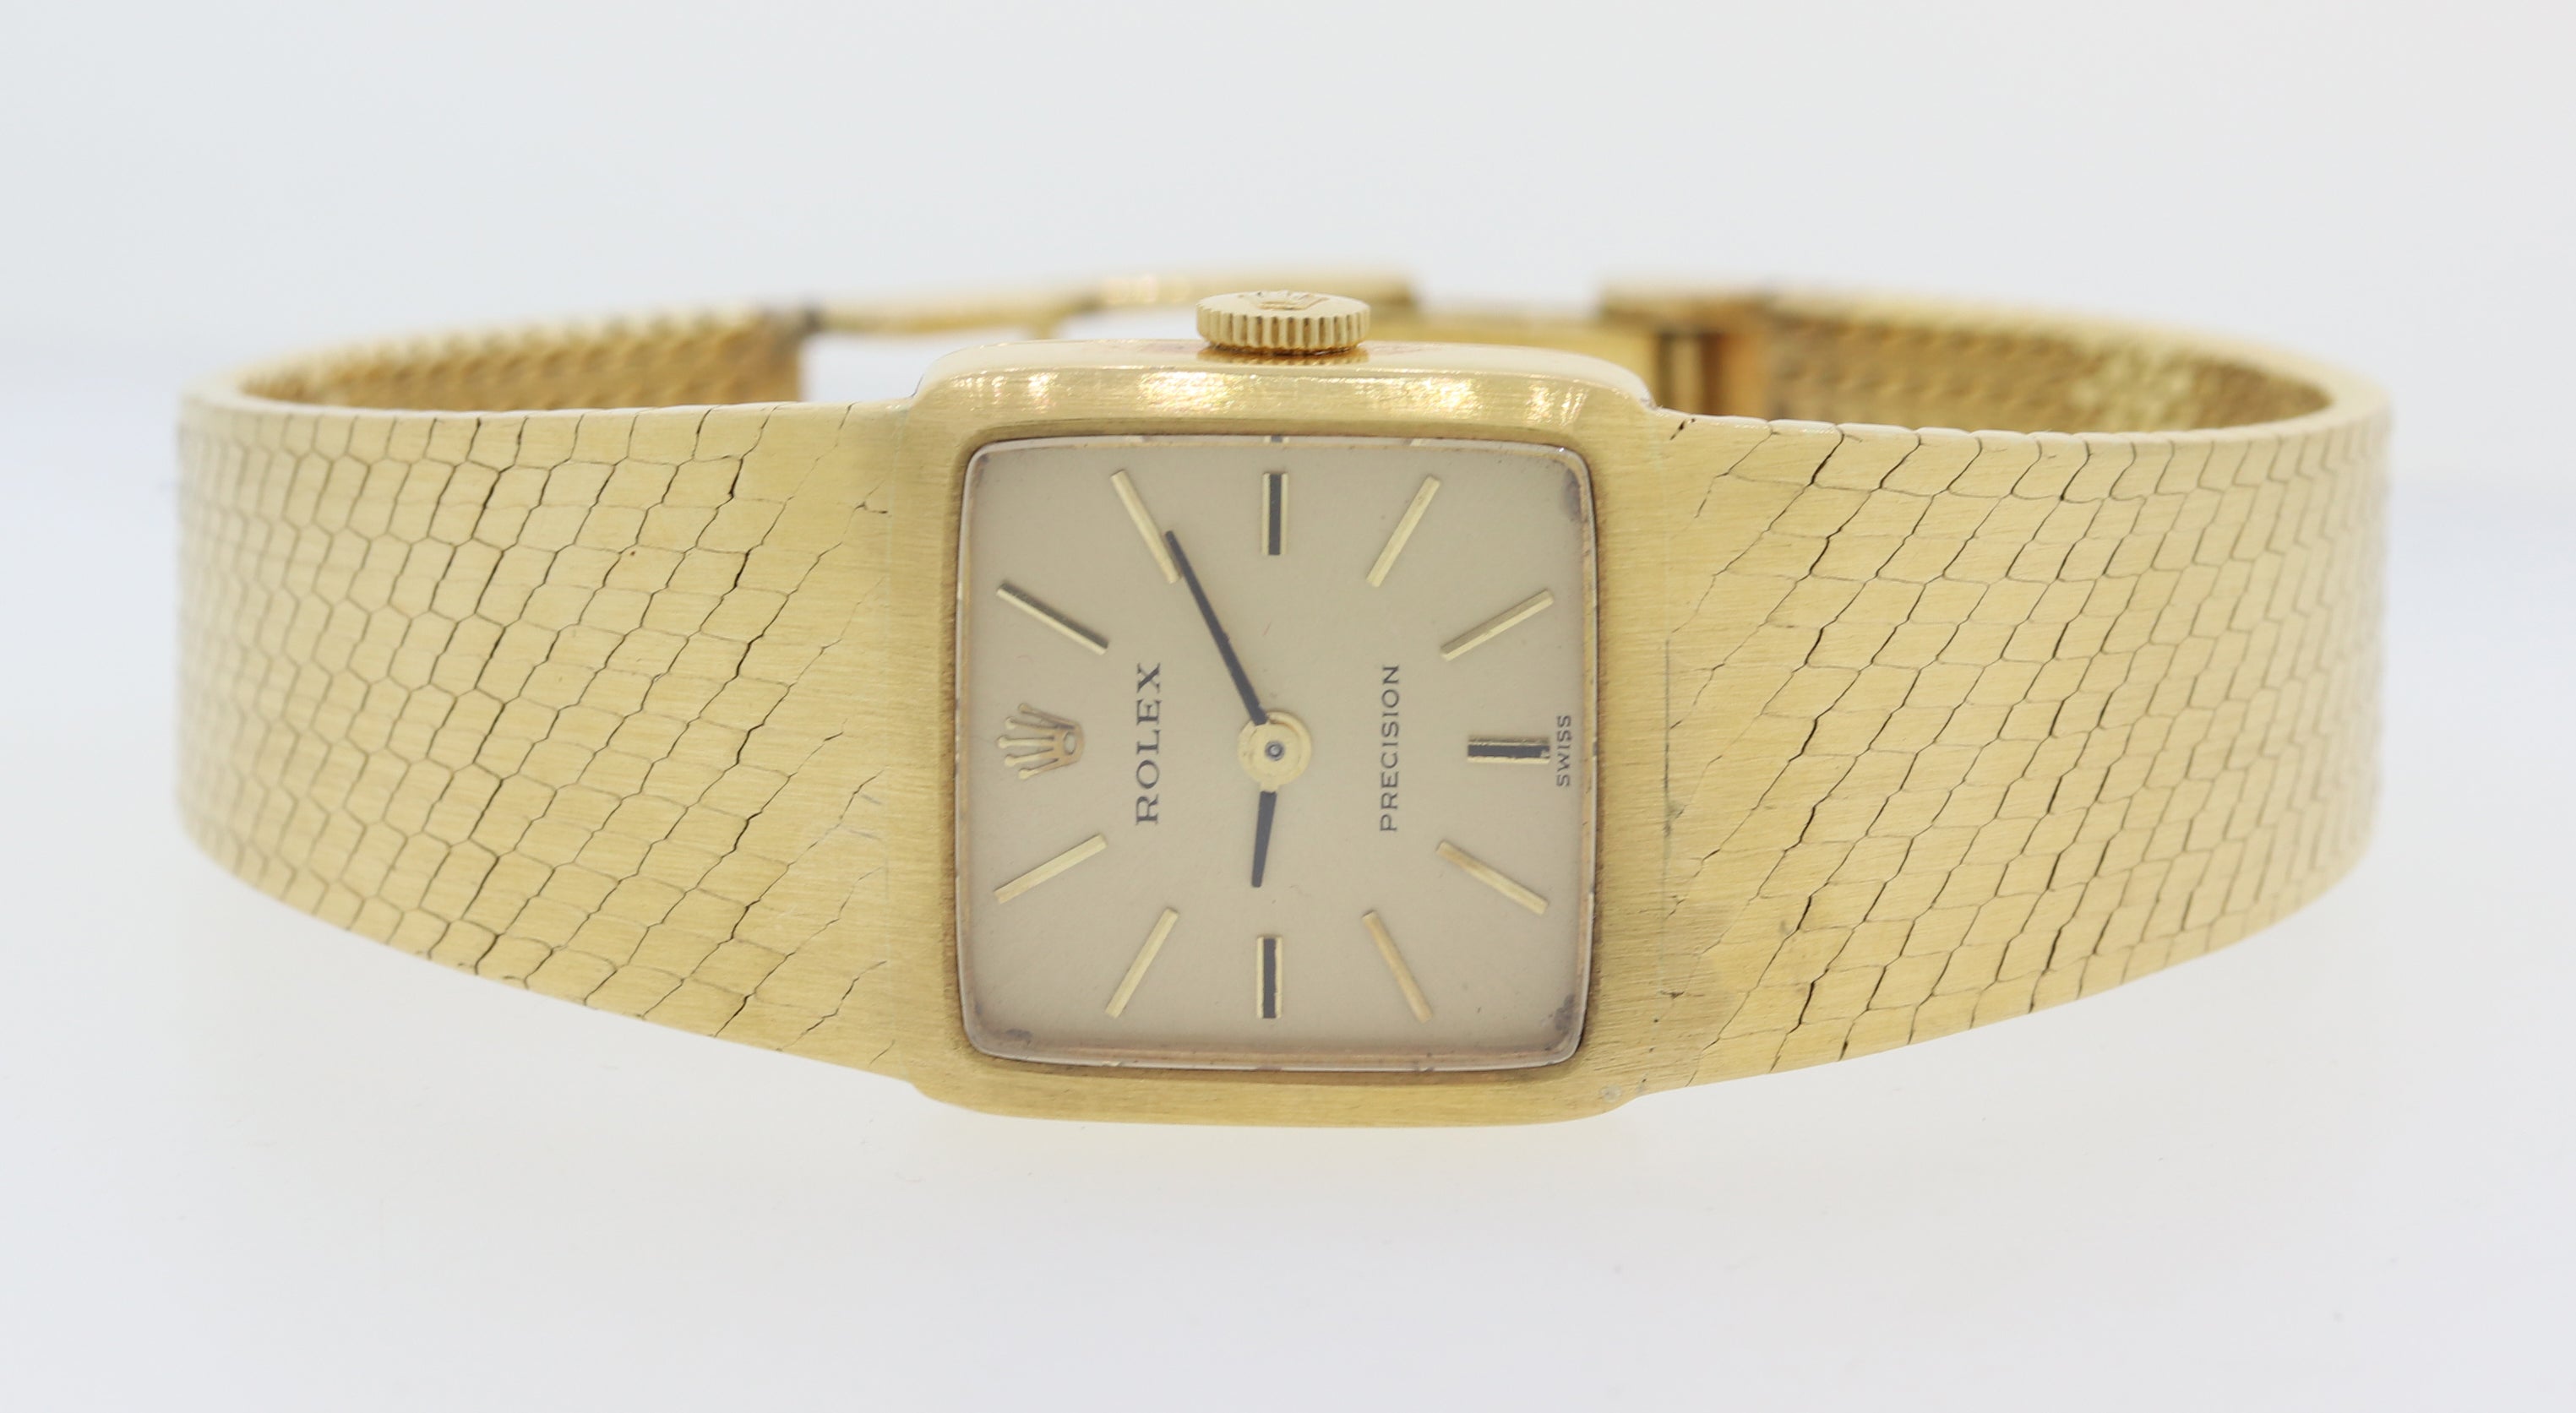 VTG Ladies Rolex 18k Solid Yellow Gold Precision 1400 Stick Manual Wind Watch A8